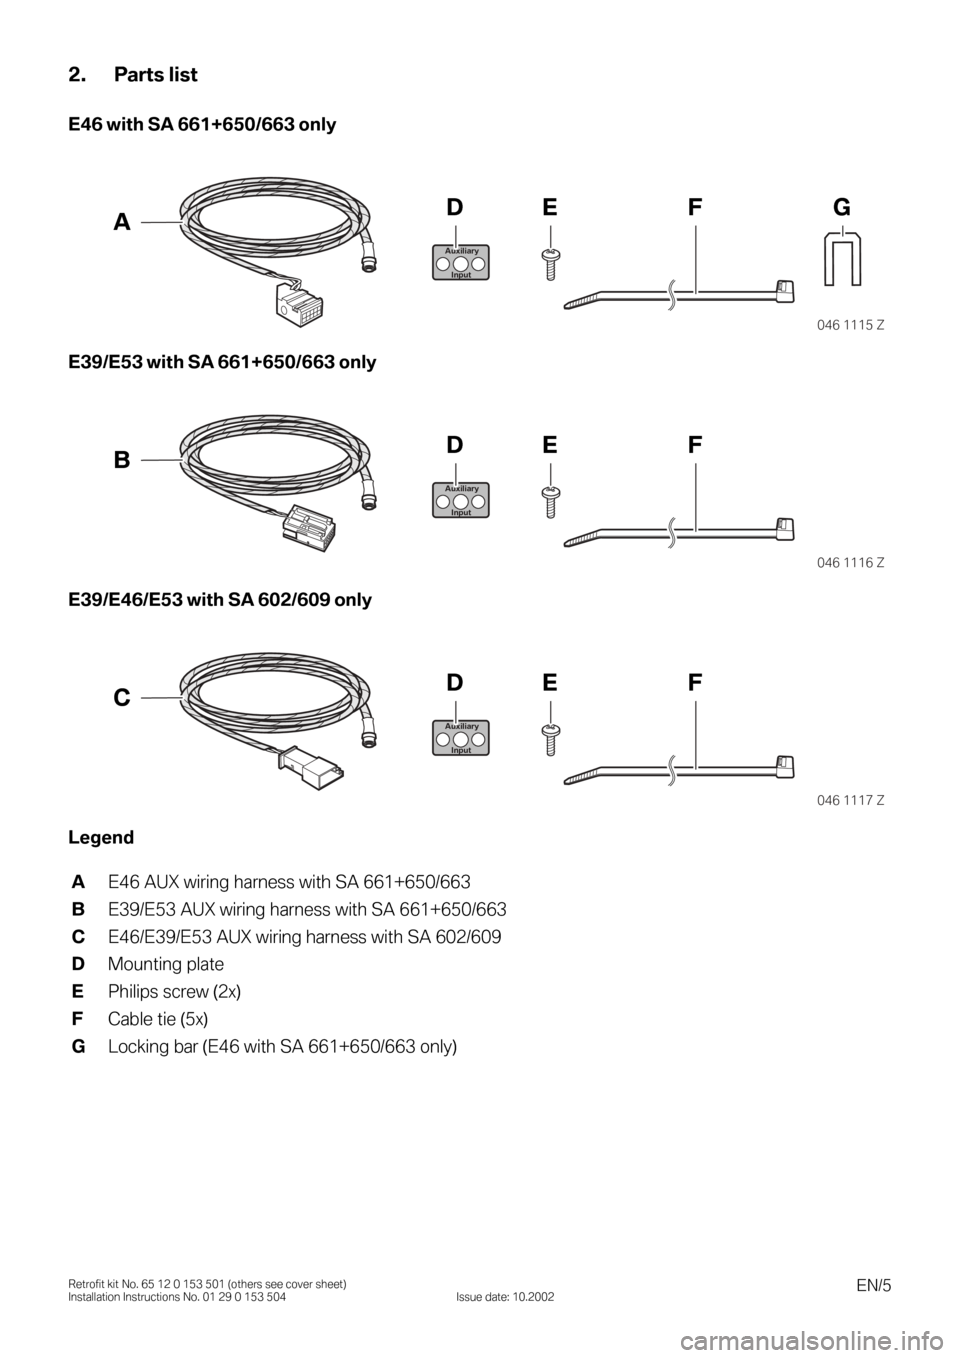 BMW X5 2006 E53 Auxilliary Connector Installation Instruction Manual EN/5Retrofit kit No. 65 12 0 153 501 (others see cover sheet)
Installation Instructions No. 01 29 0 153 504 Issue date: 10.2002
2. Parts list
E46 with SA 661+650/663 only
0
E39/E53 with SA 661+650/663